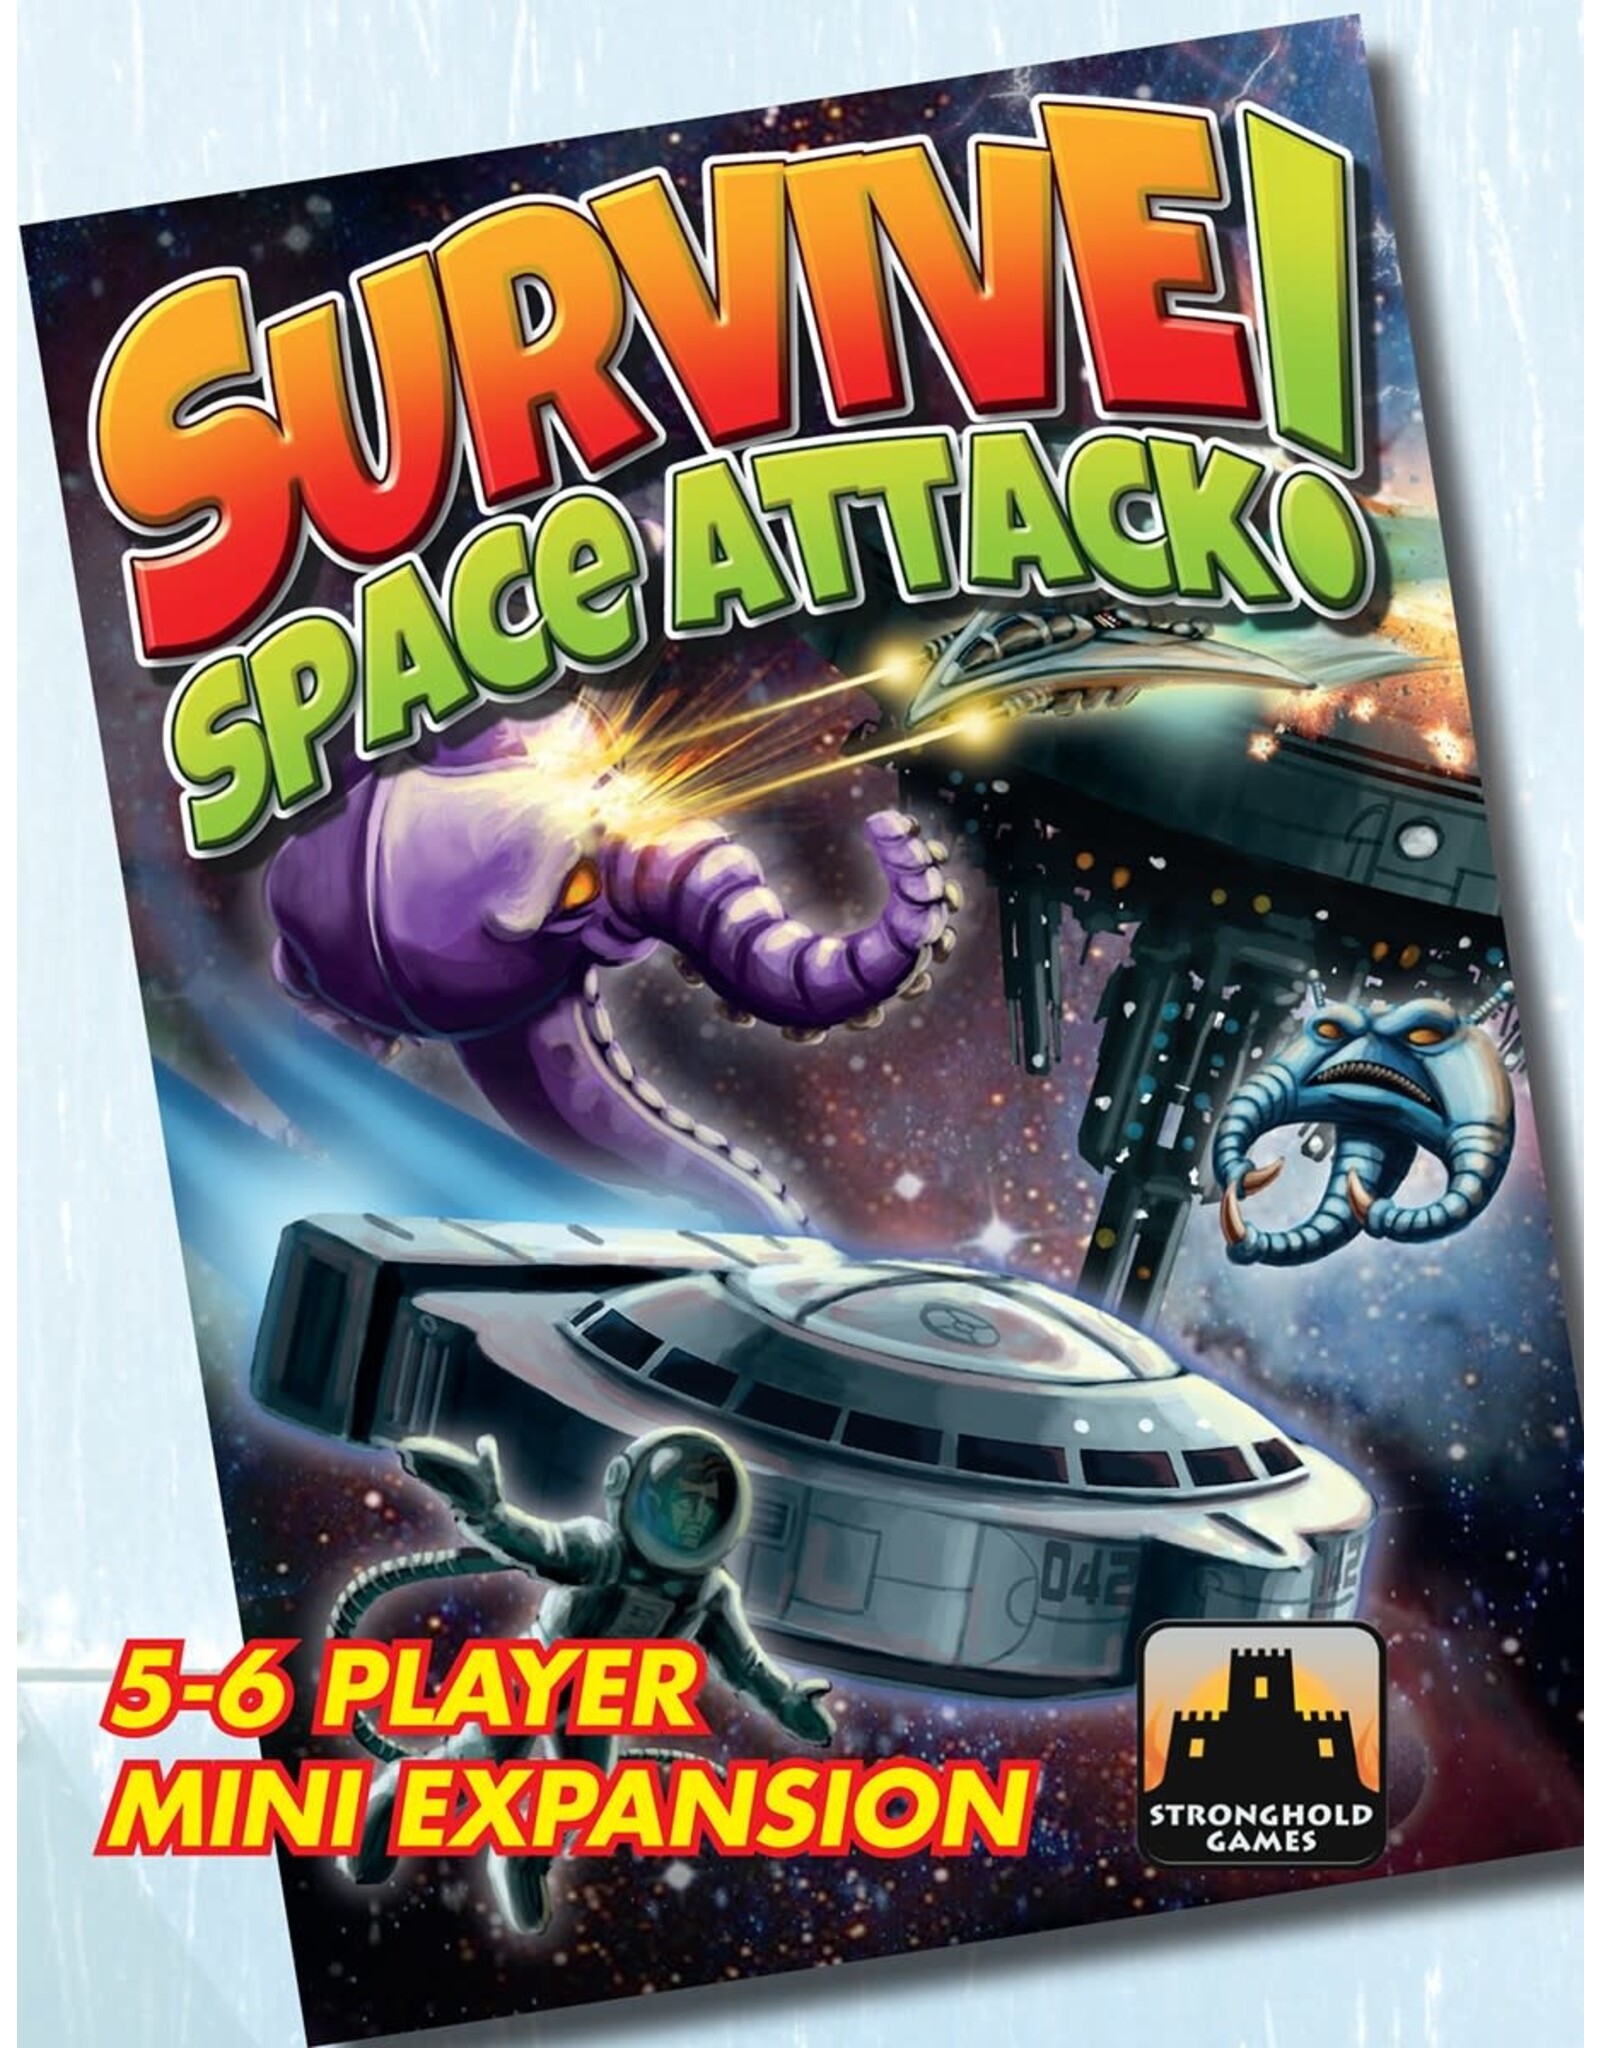 SURVIVE SPACE ATTACK 5 & 6 PLAYER